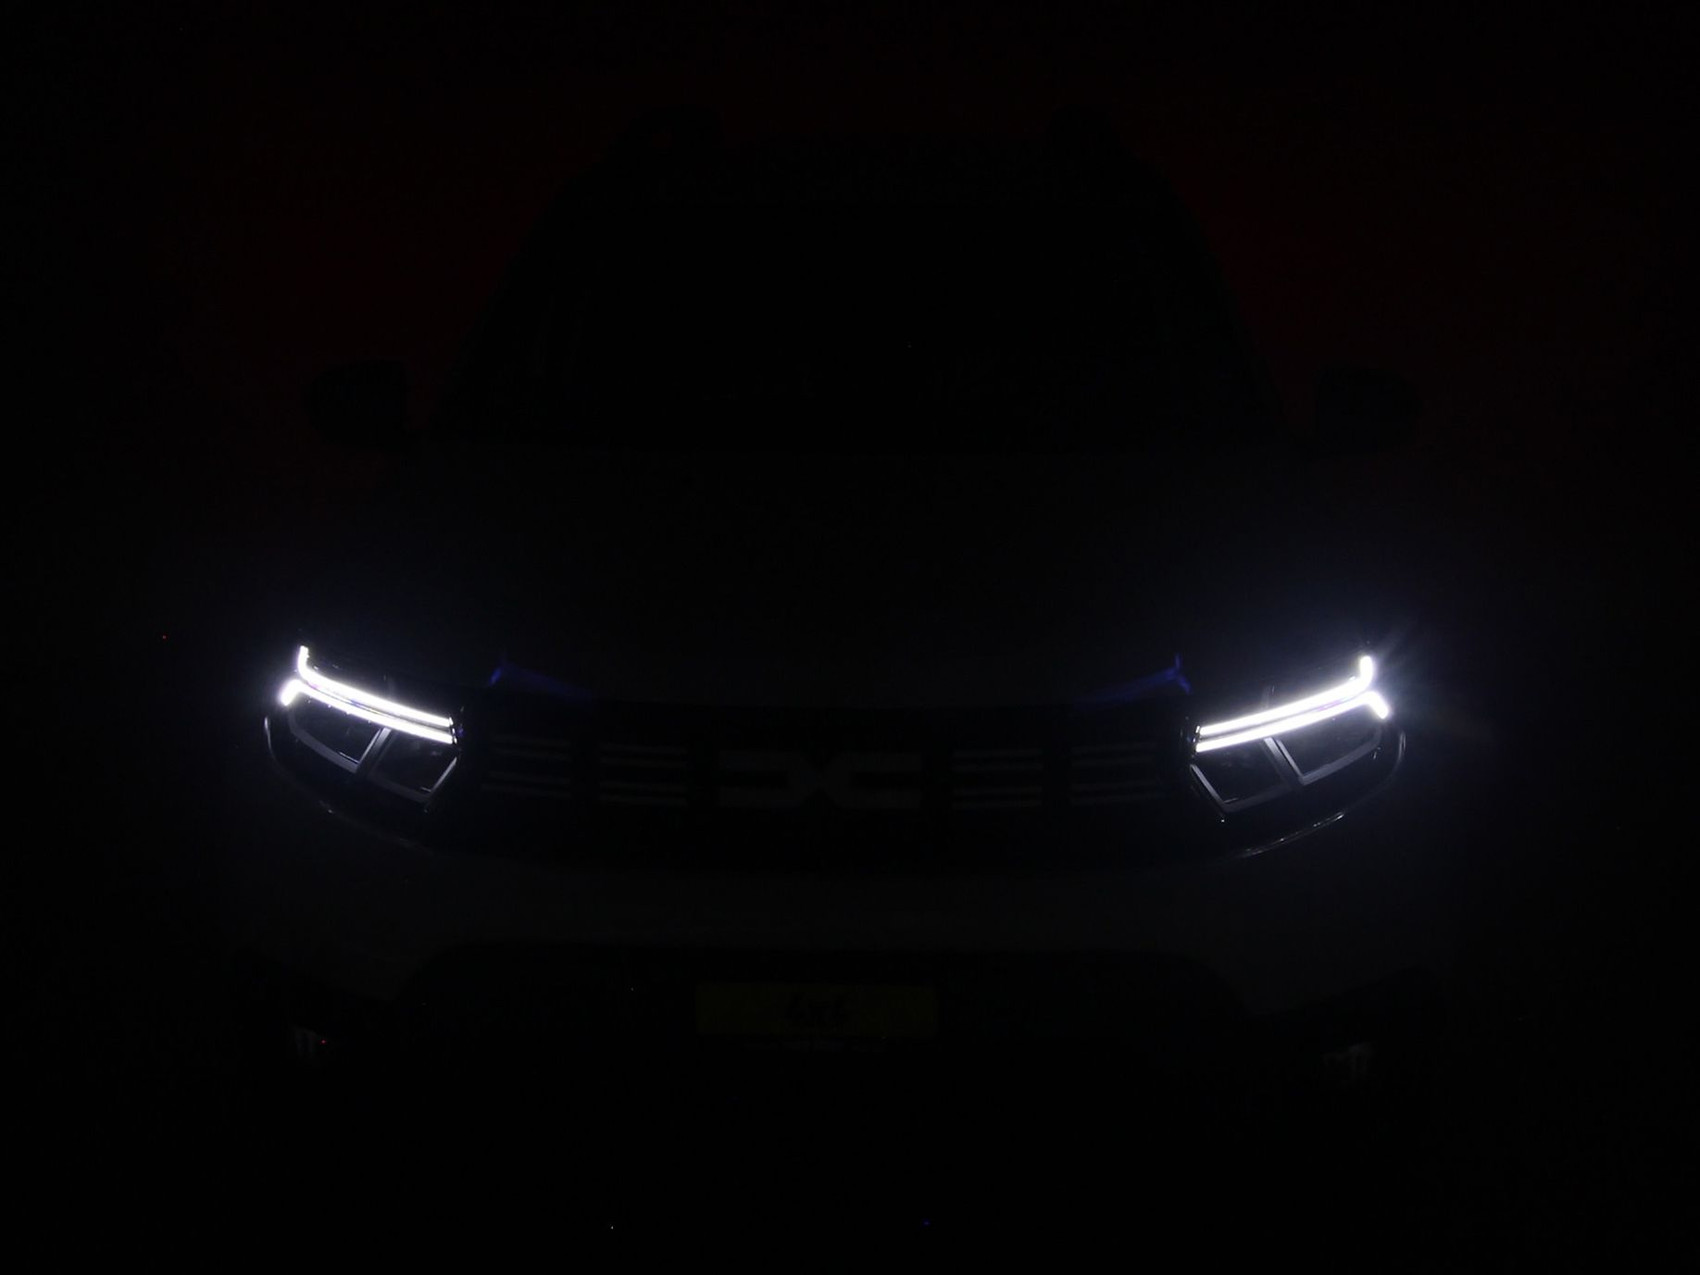 DACIA Duster 1.3 TCe Extreme 4×4